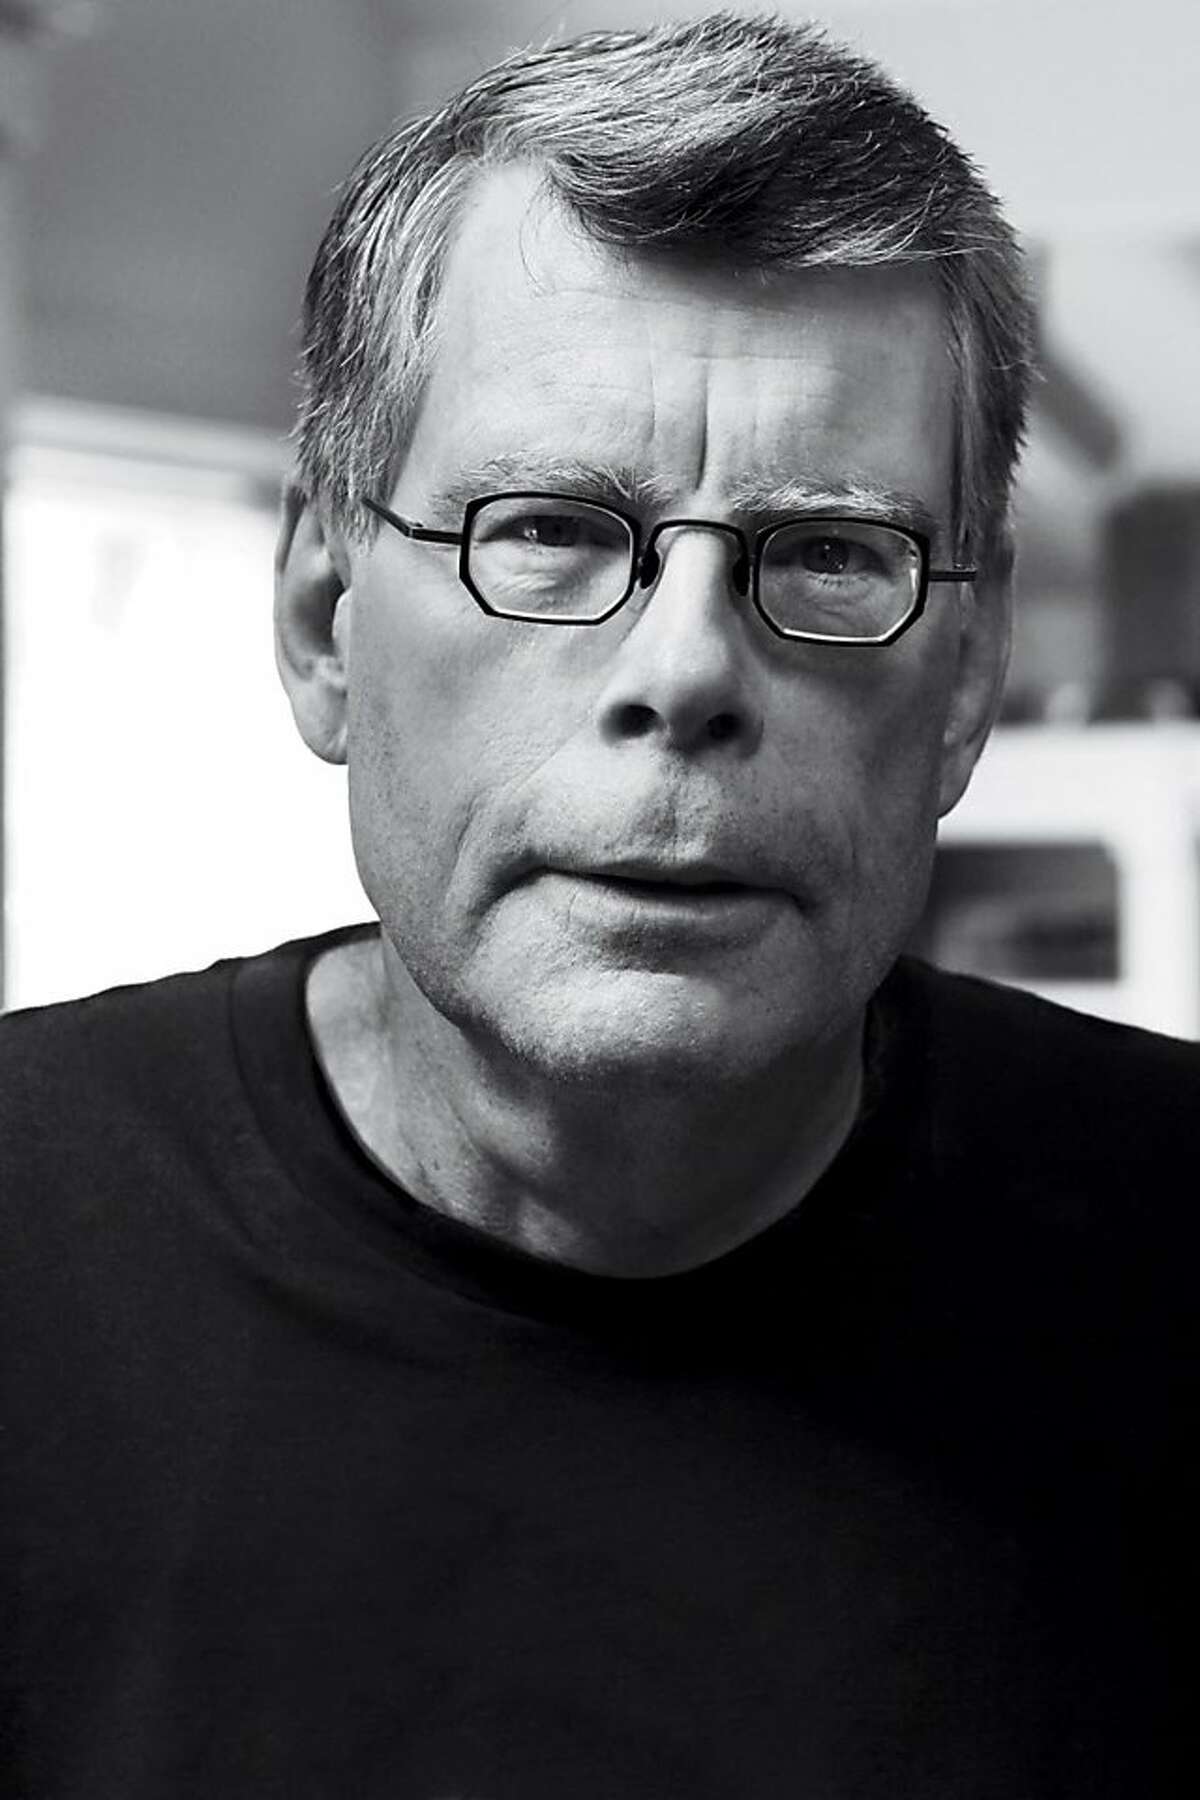 In his new novel, “11/22/63,” Stephen King goes back in time to save John F. Kennedy from Lee Harvey Oswald and shows how far he has come as America’s chief chronicler of the creepy. Illustrates BOOKS-KING (category e), by Andrew Dunn (c) 2011, Bloomberg News. Moved Tuesday, Nov. 8, 2011. (MUST CREDIT: Shane Leonard/Simon and Schuster.)